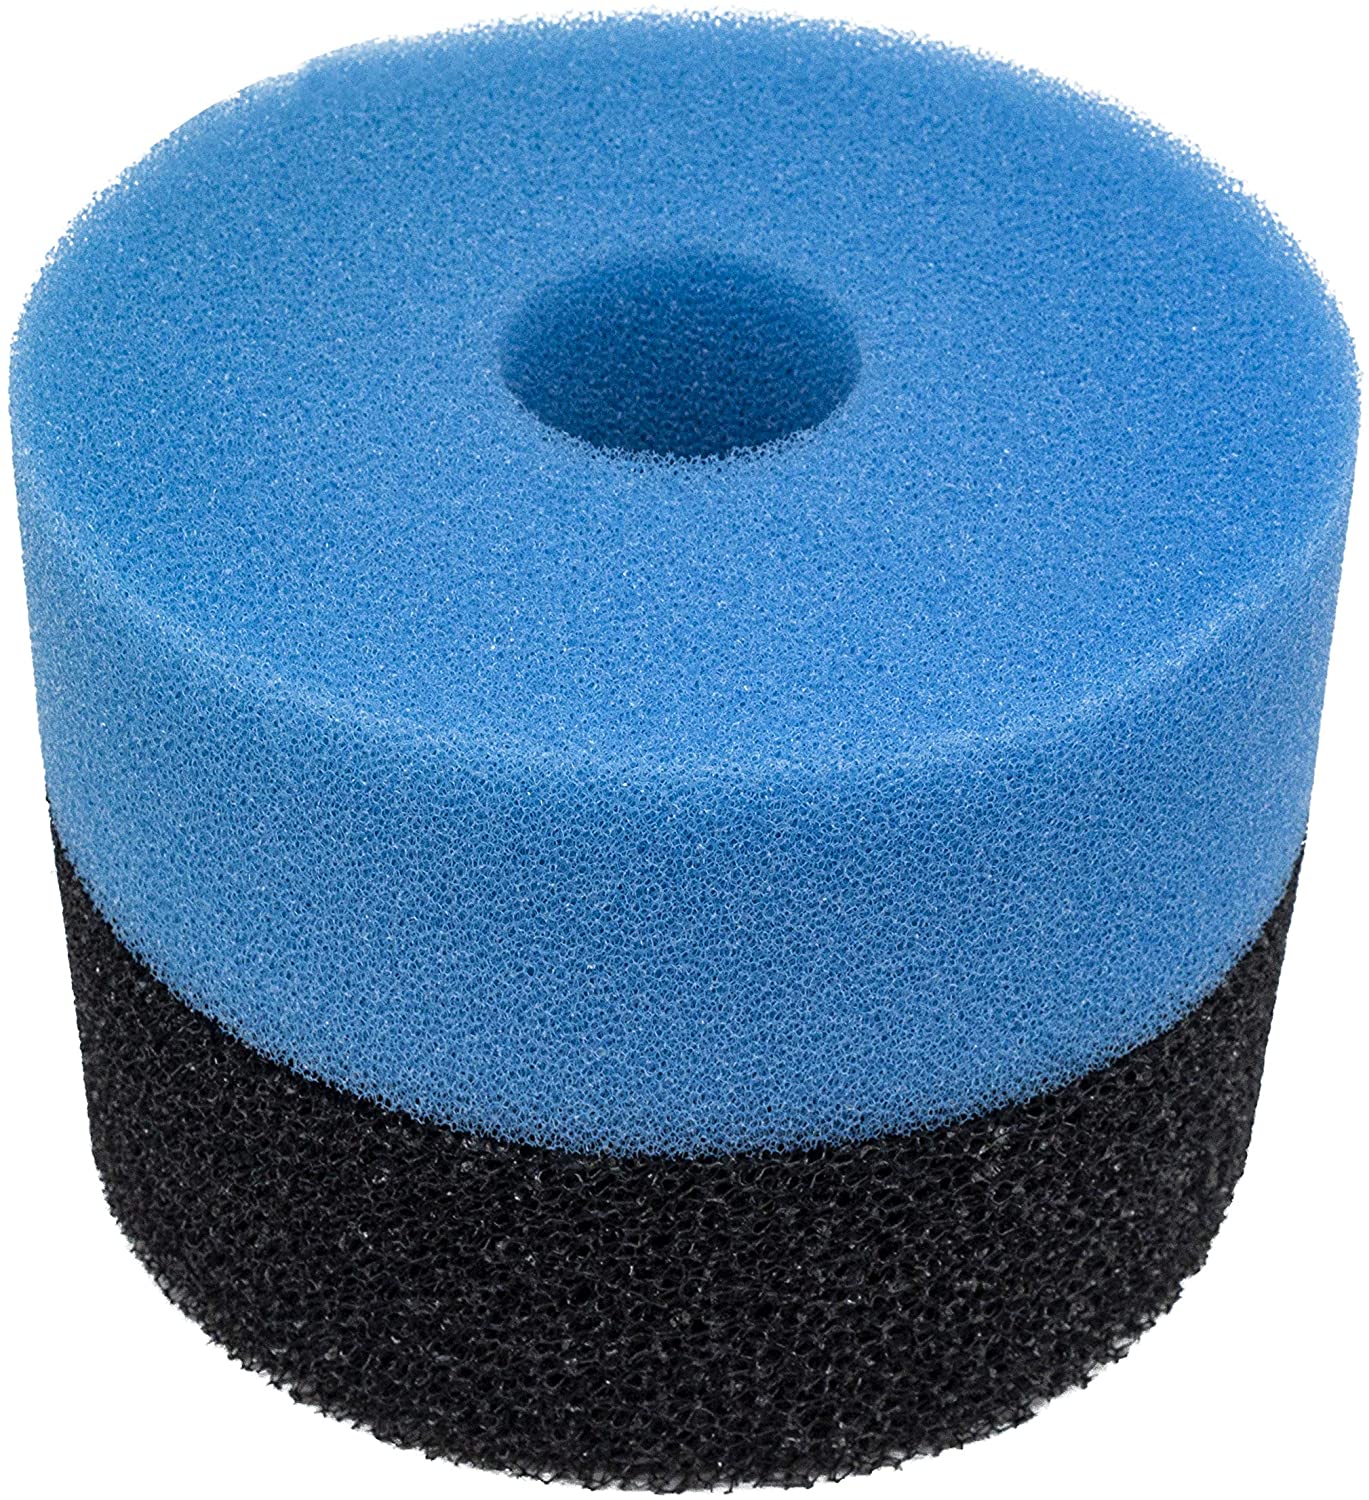 LTWHOME Black and Blue Filter Sponge Fit for Jebao CF-10, PF-10 and Bermuda 4000 Pressure Filter (Pack of 1 Set)